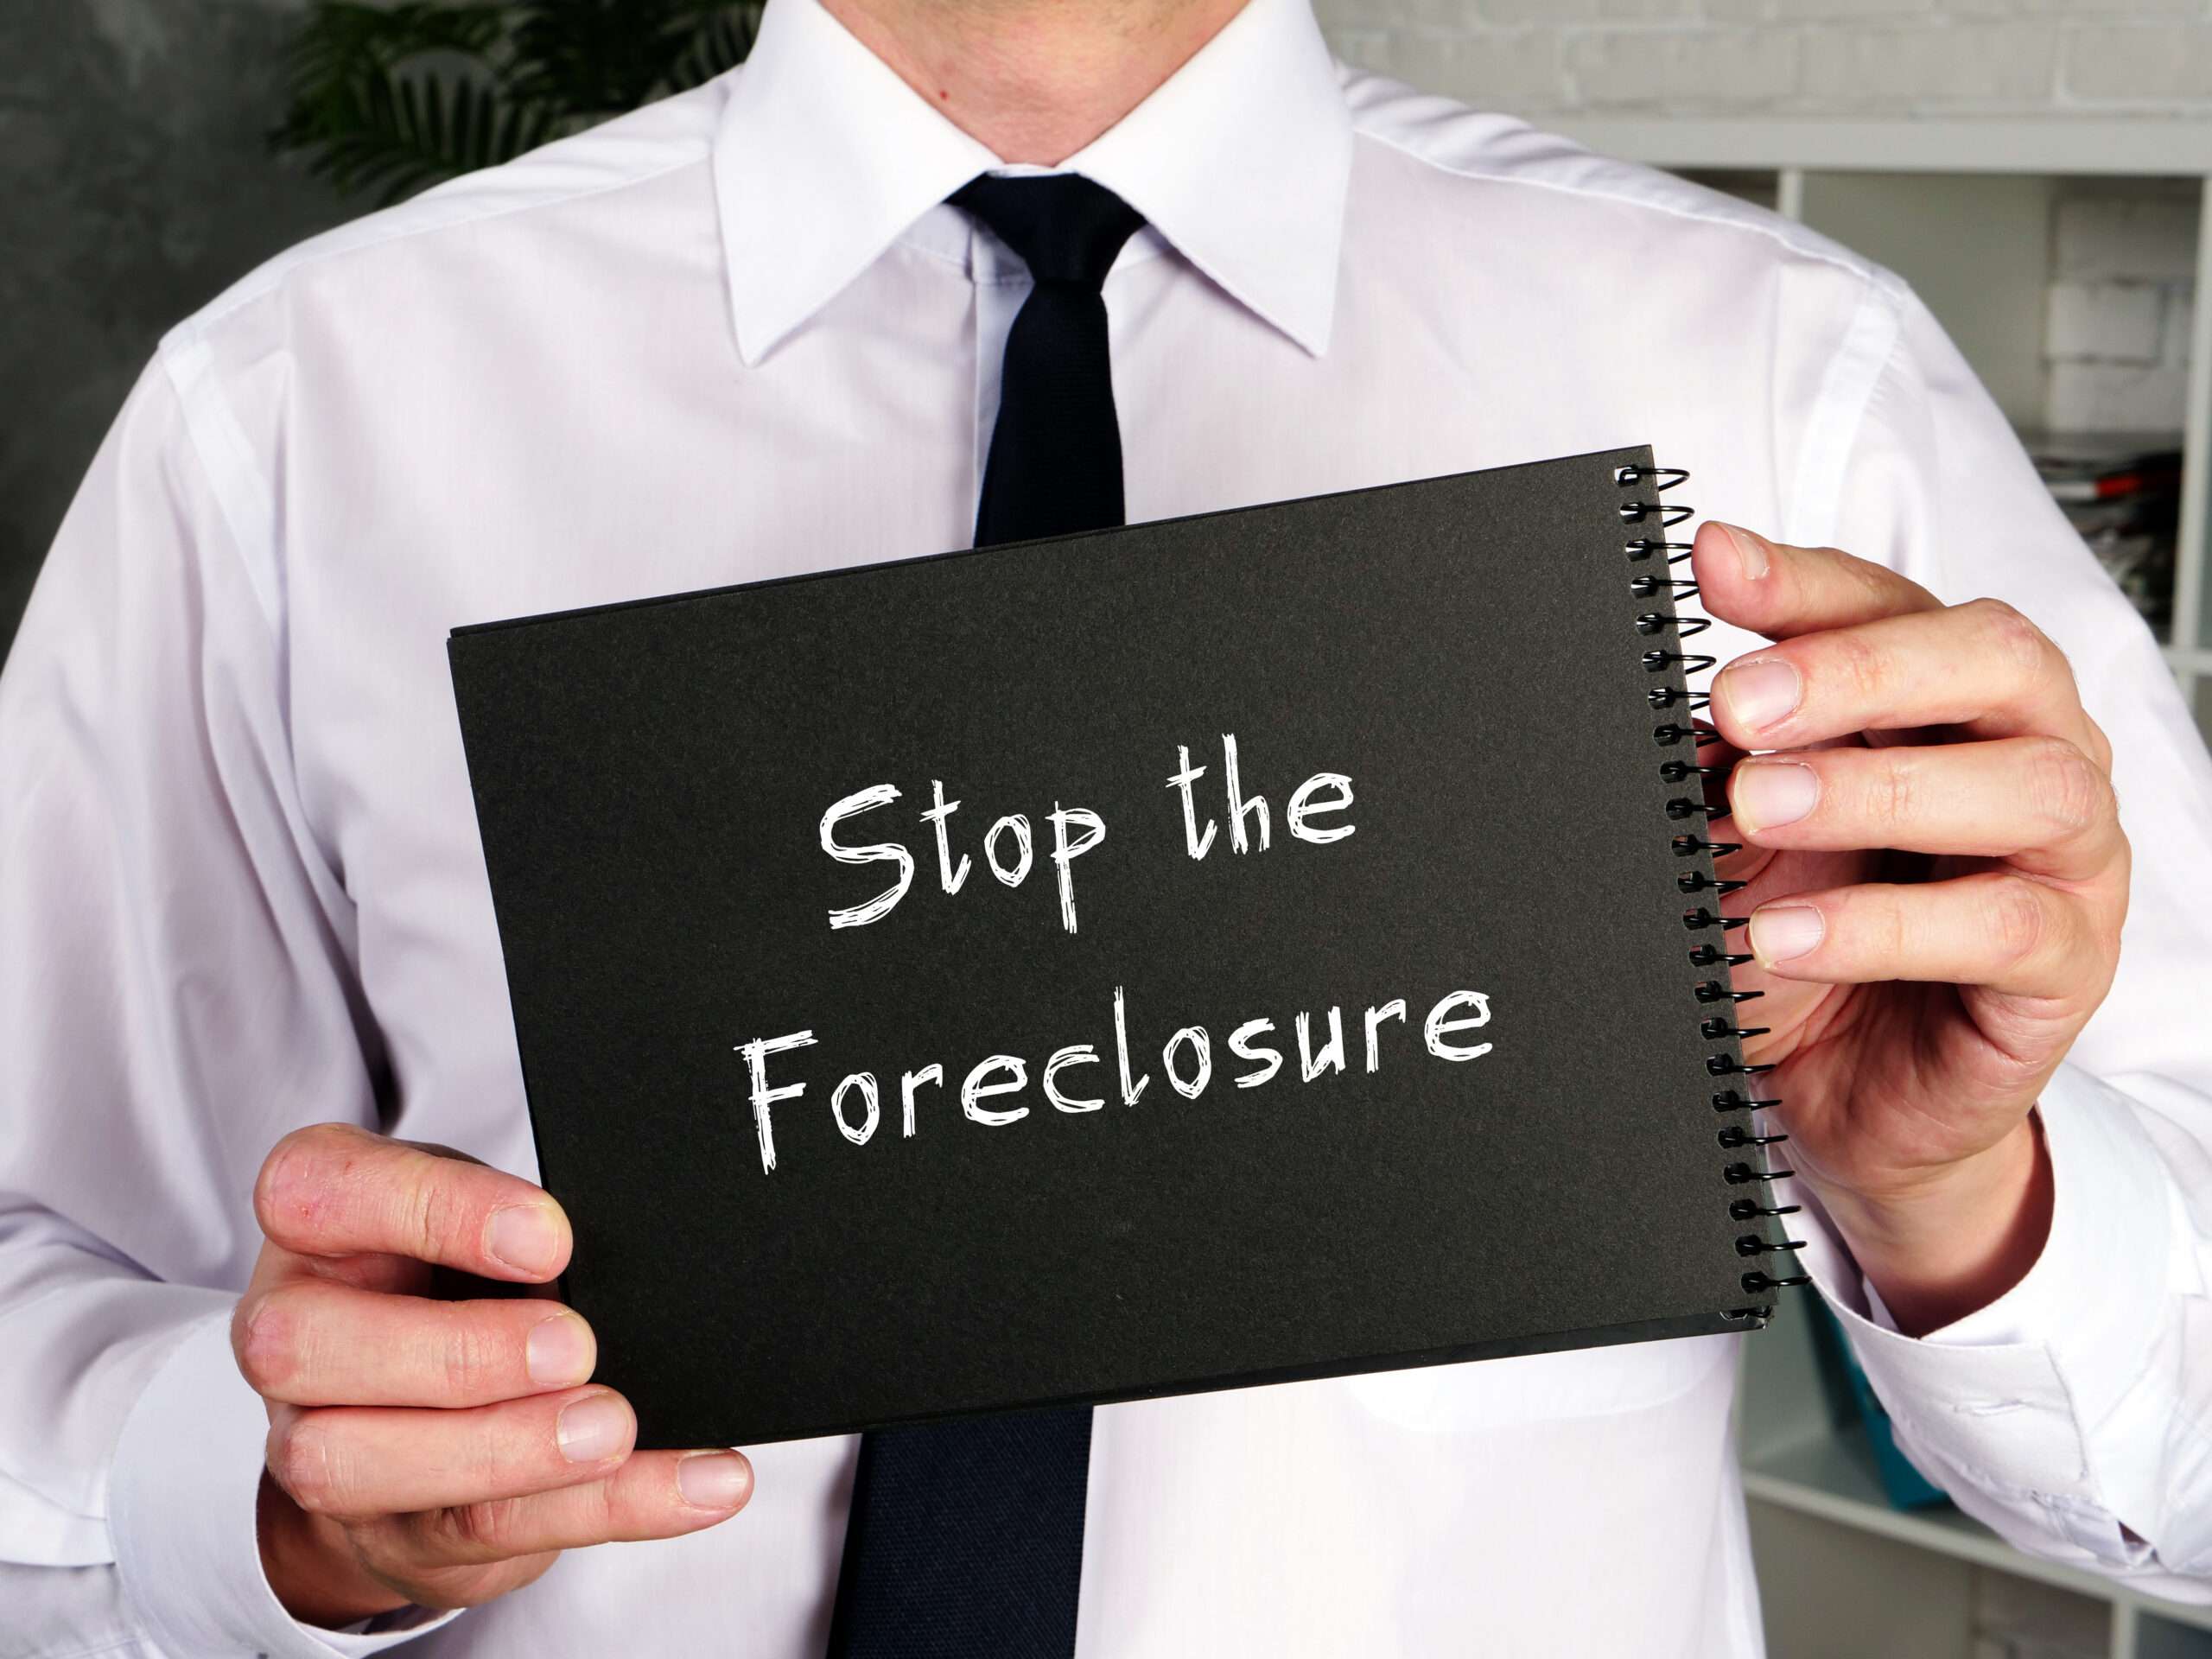 Discover the steps that can lead to foreclosure. and how to avoid it